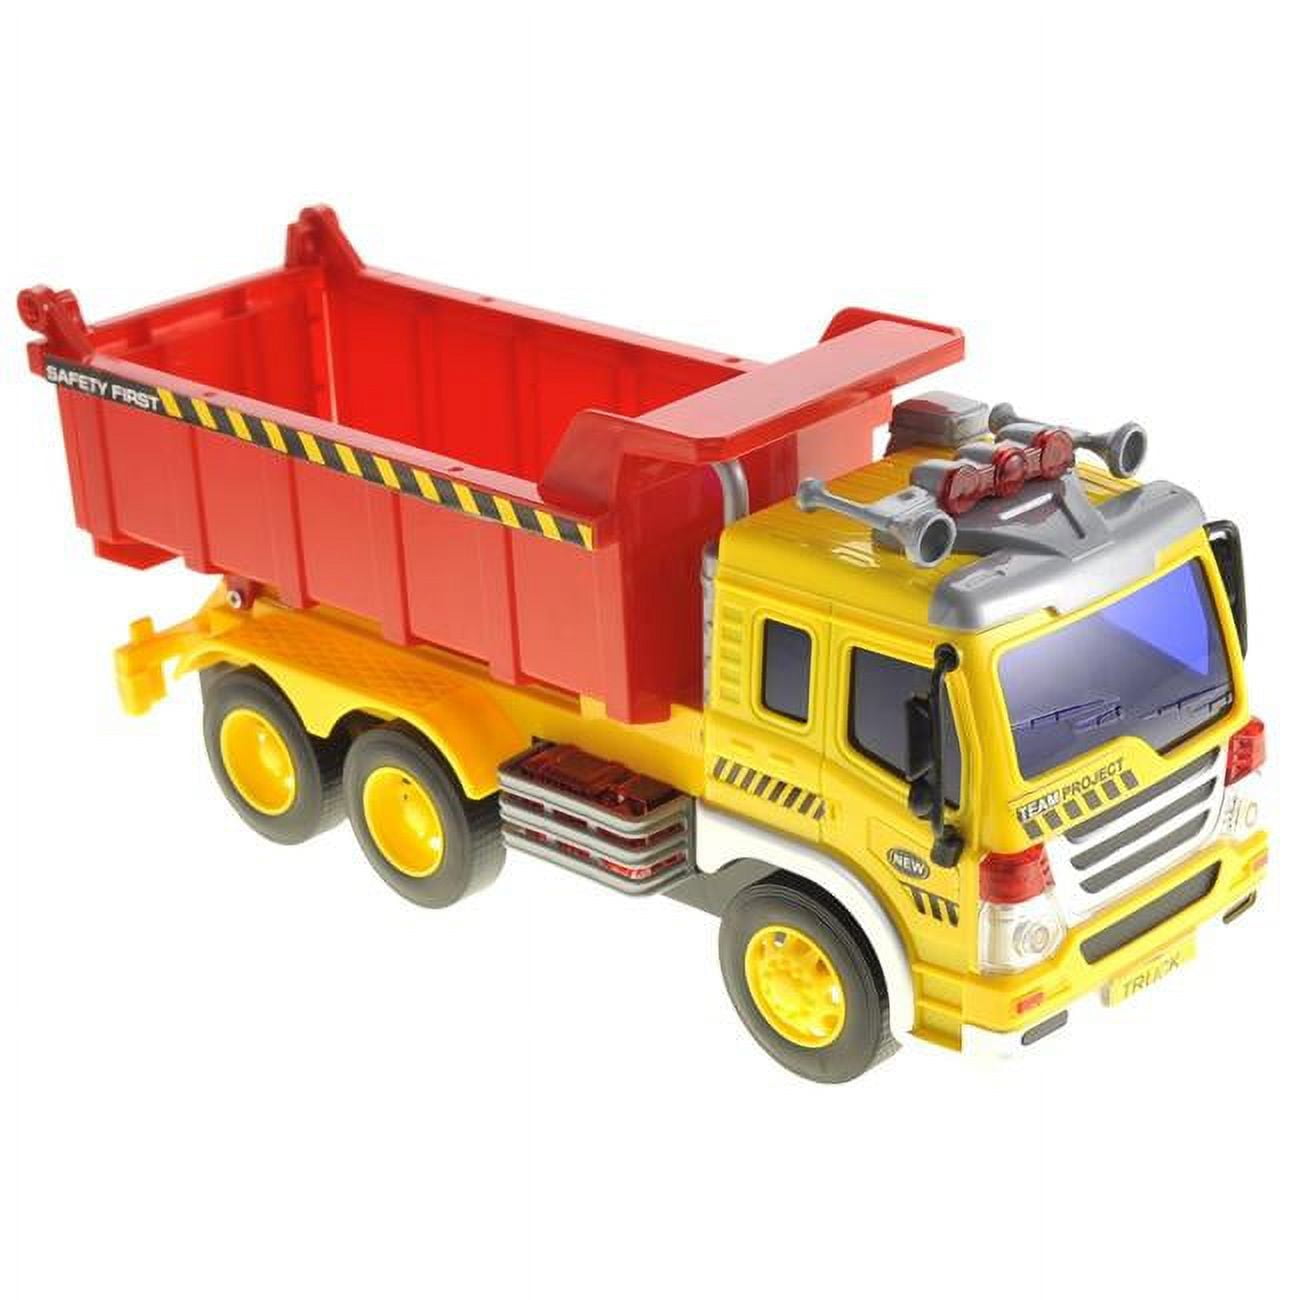 Ps301s Friction Powered Dump Truck Toy